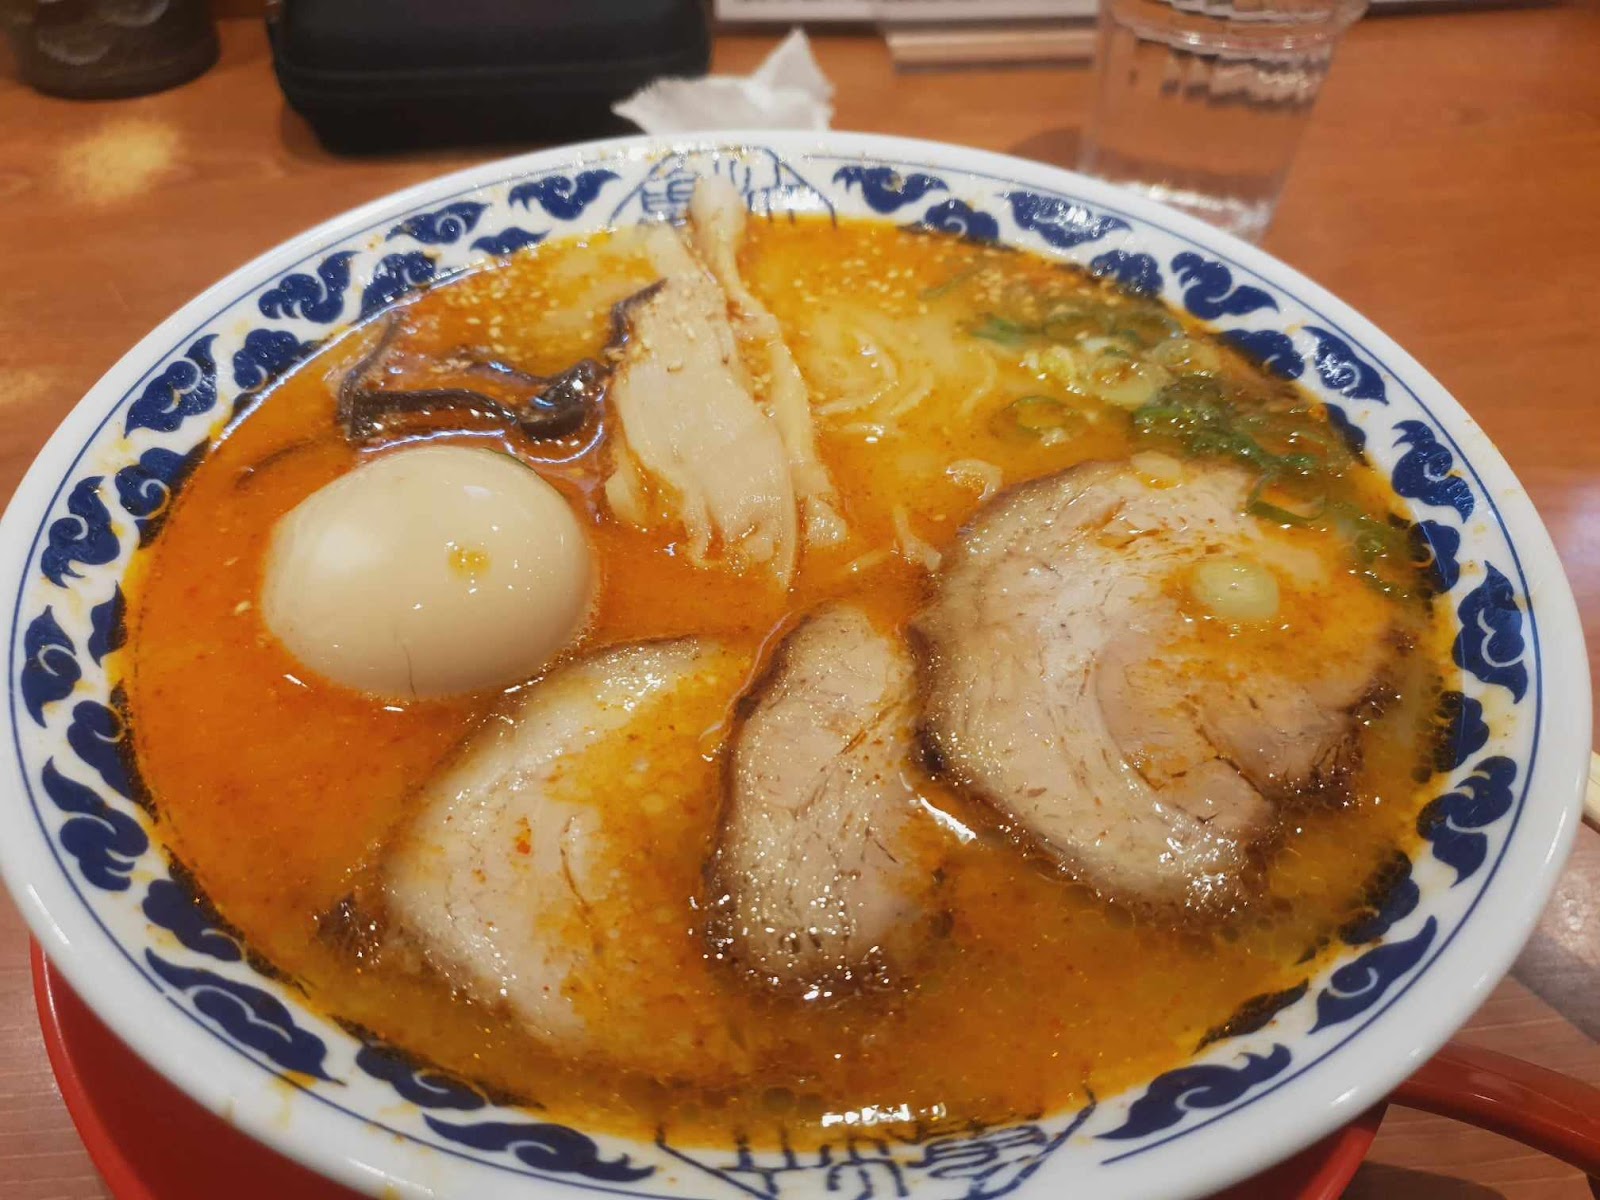 char siu slices and soft boiled egg on spicy Hakata ramen 